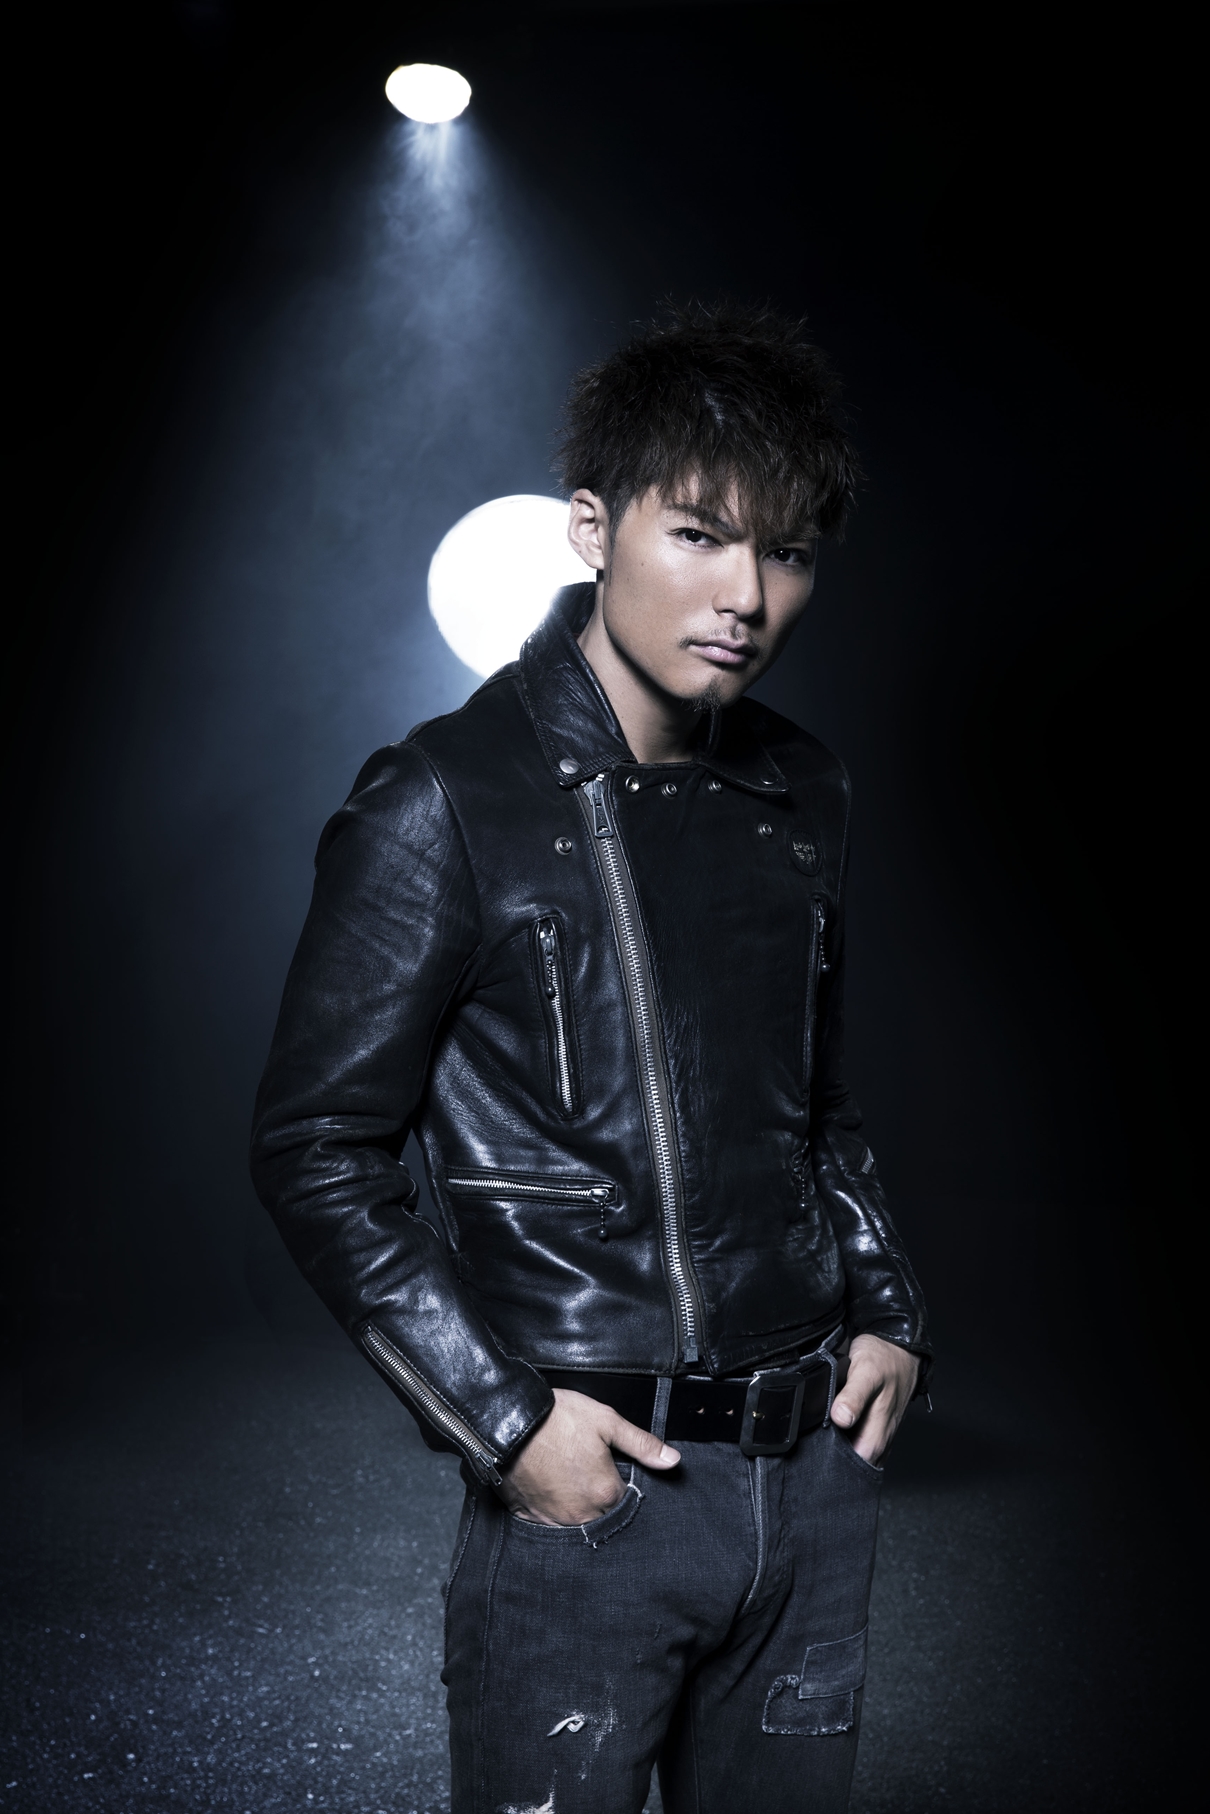 Gwにexile Shokichiをゲストに迎えfm802 Tacty In The Morning 公開収録を実施 Daily News Billboard Japan